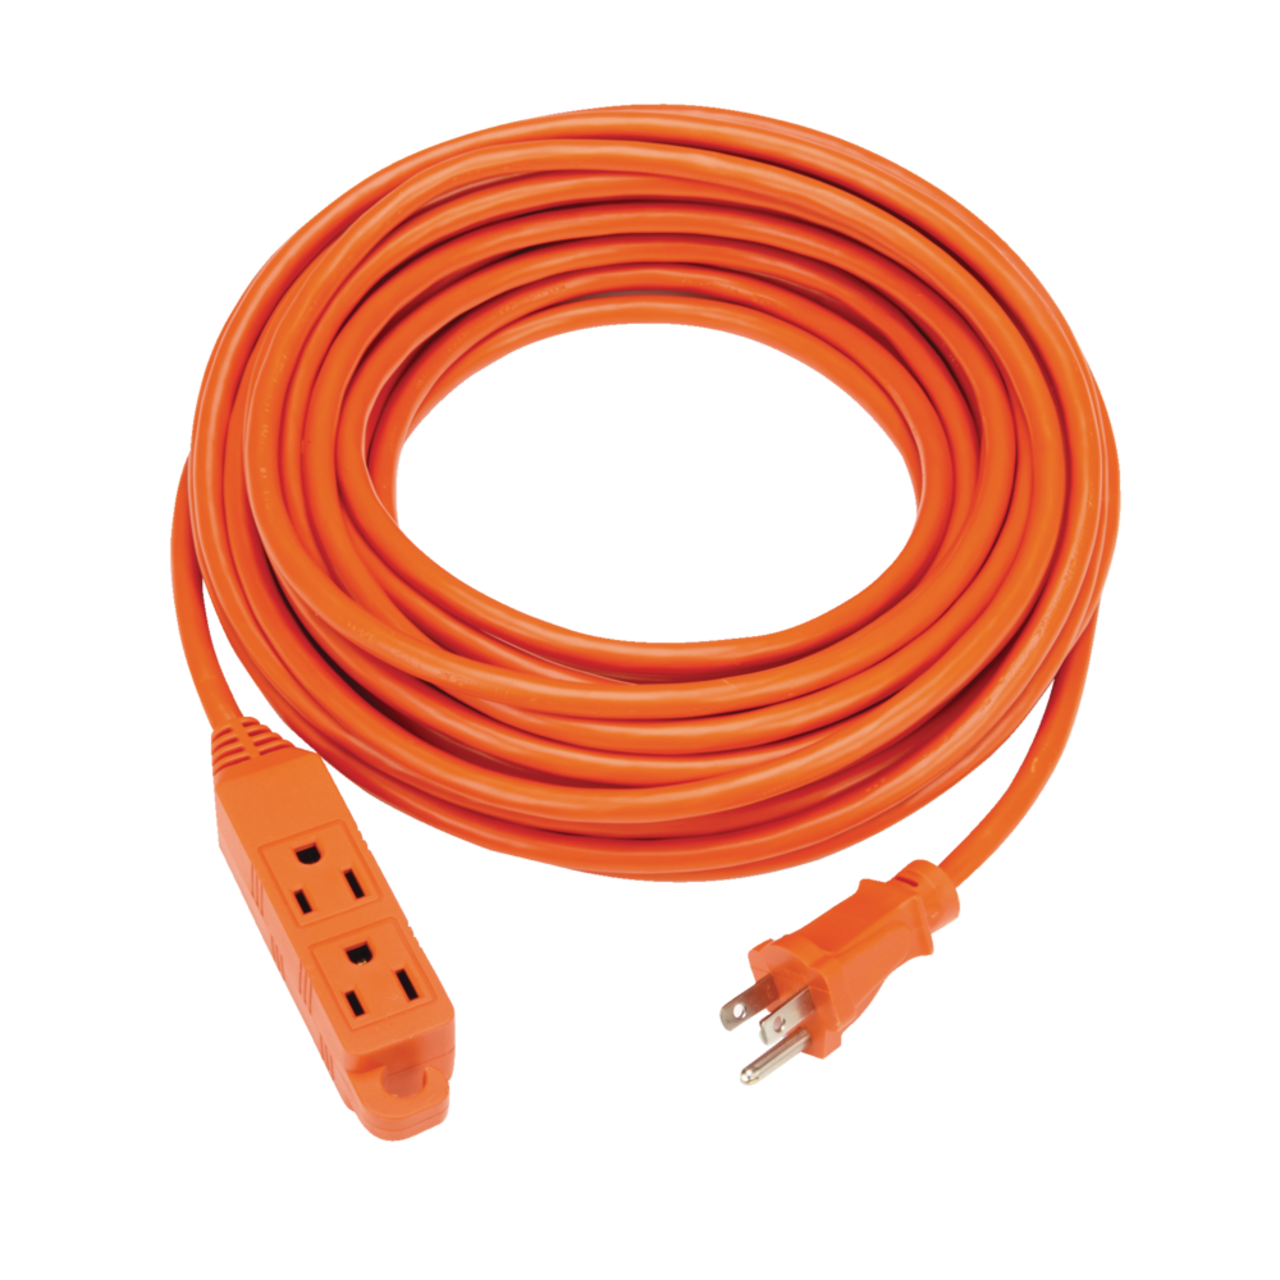 https://media-www.canadiantire.ca/product/fixing/electrical/power-bars-extension-cords-timers/0522494/noma-orange-49-3-15m-outdoor-cord-16-3-banana-end-e32a5e52-381e-4a67-b035-14b1fb52ad75.png?imdensity=1&imwidth=640&impolicy=mZoom